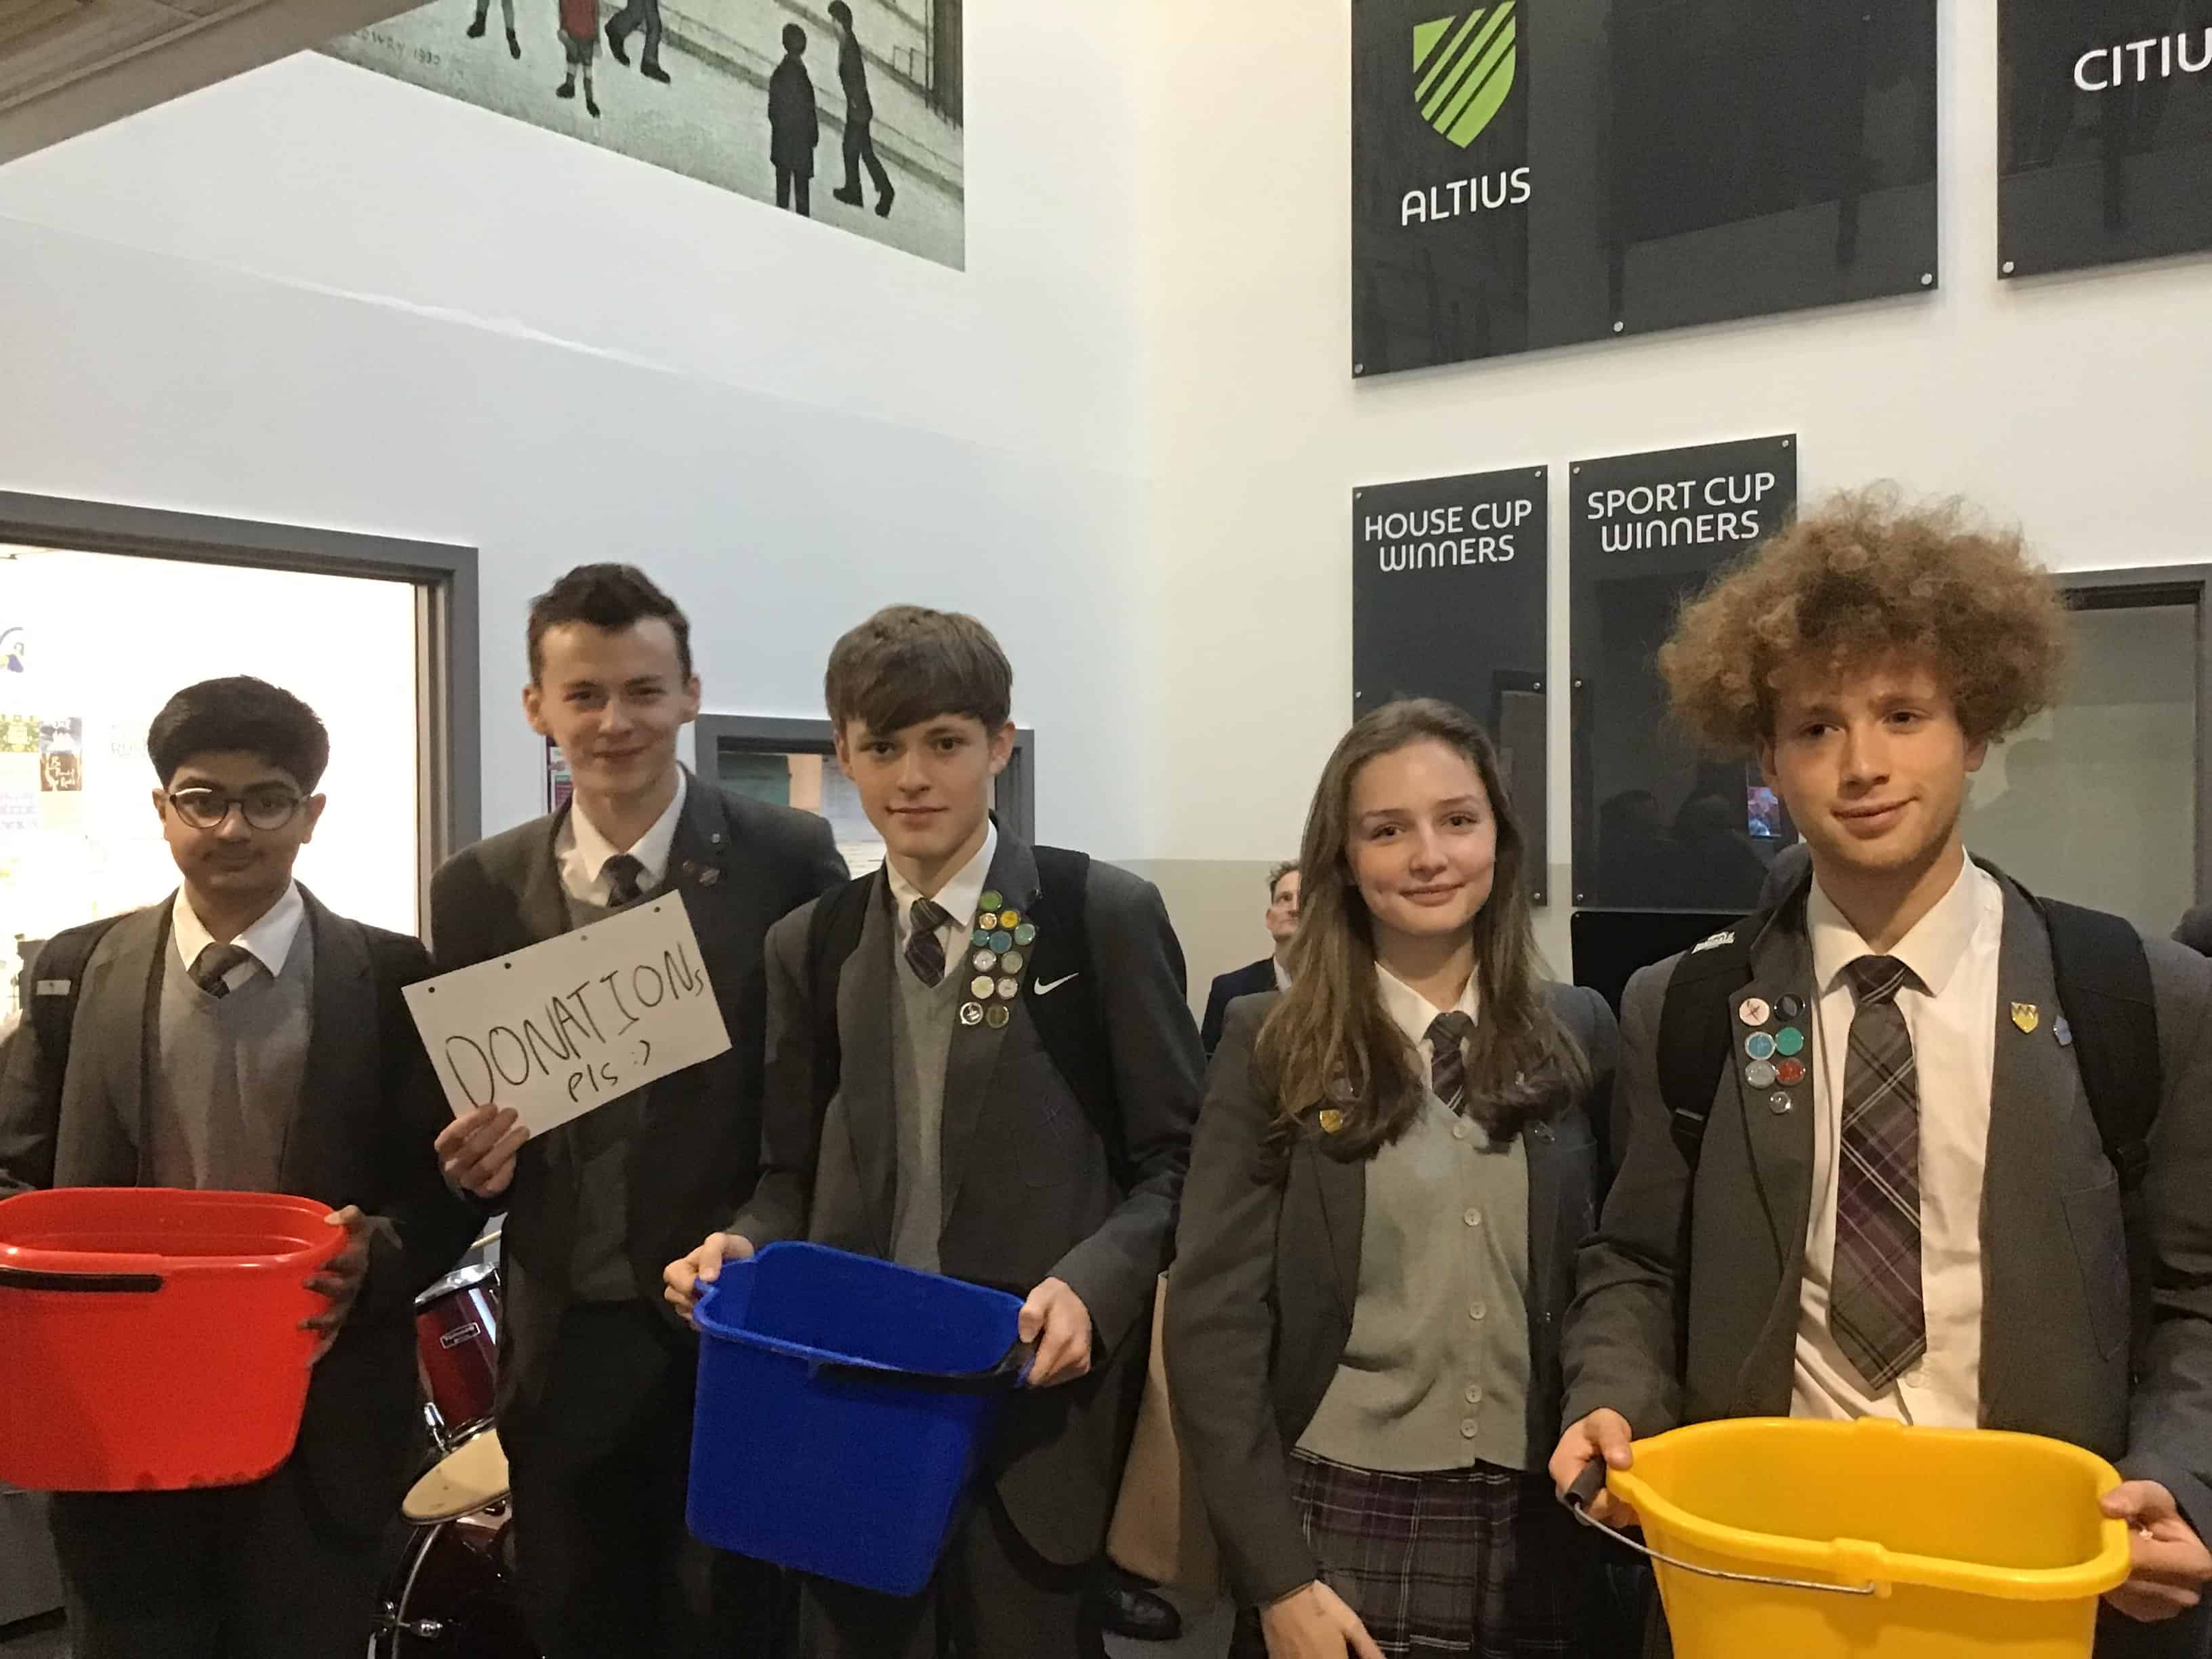 Students at Laurus Cheadle Hulme hold up buckets for donations.